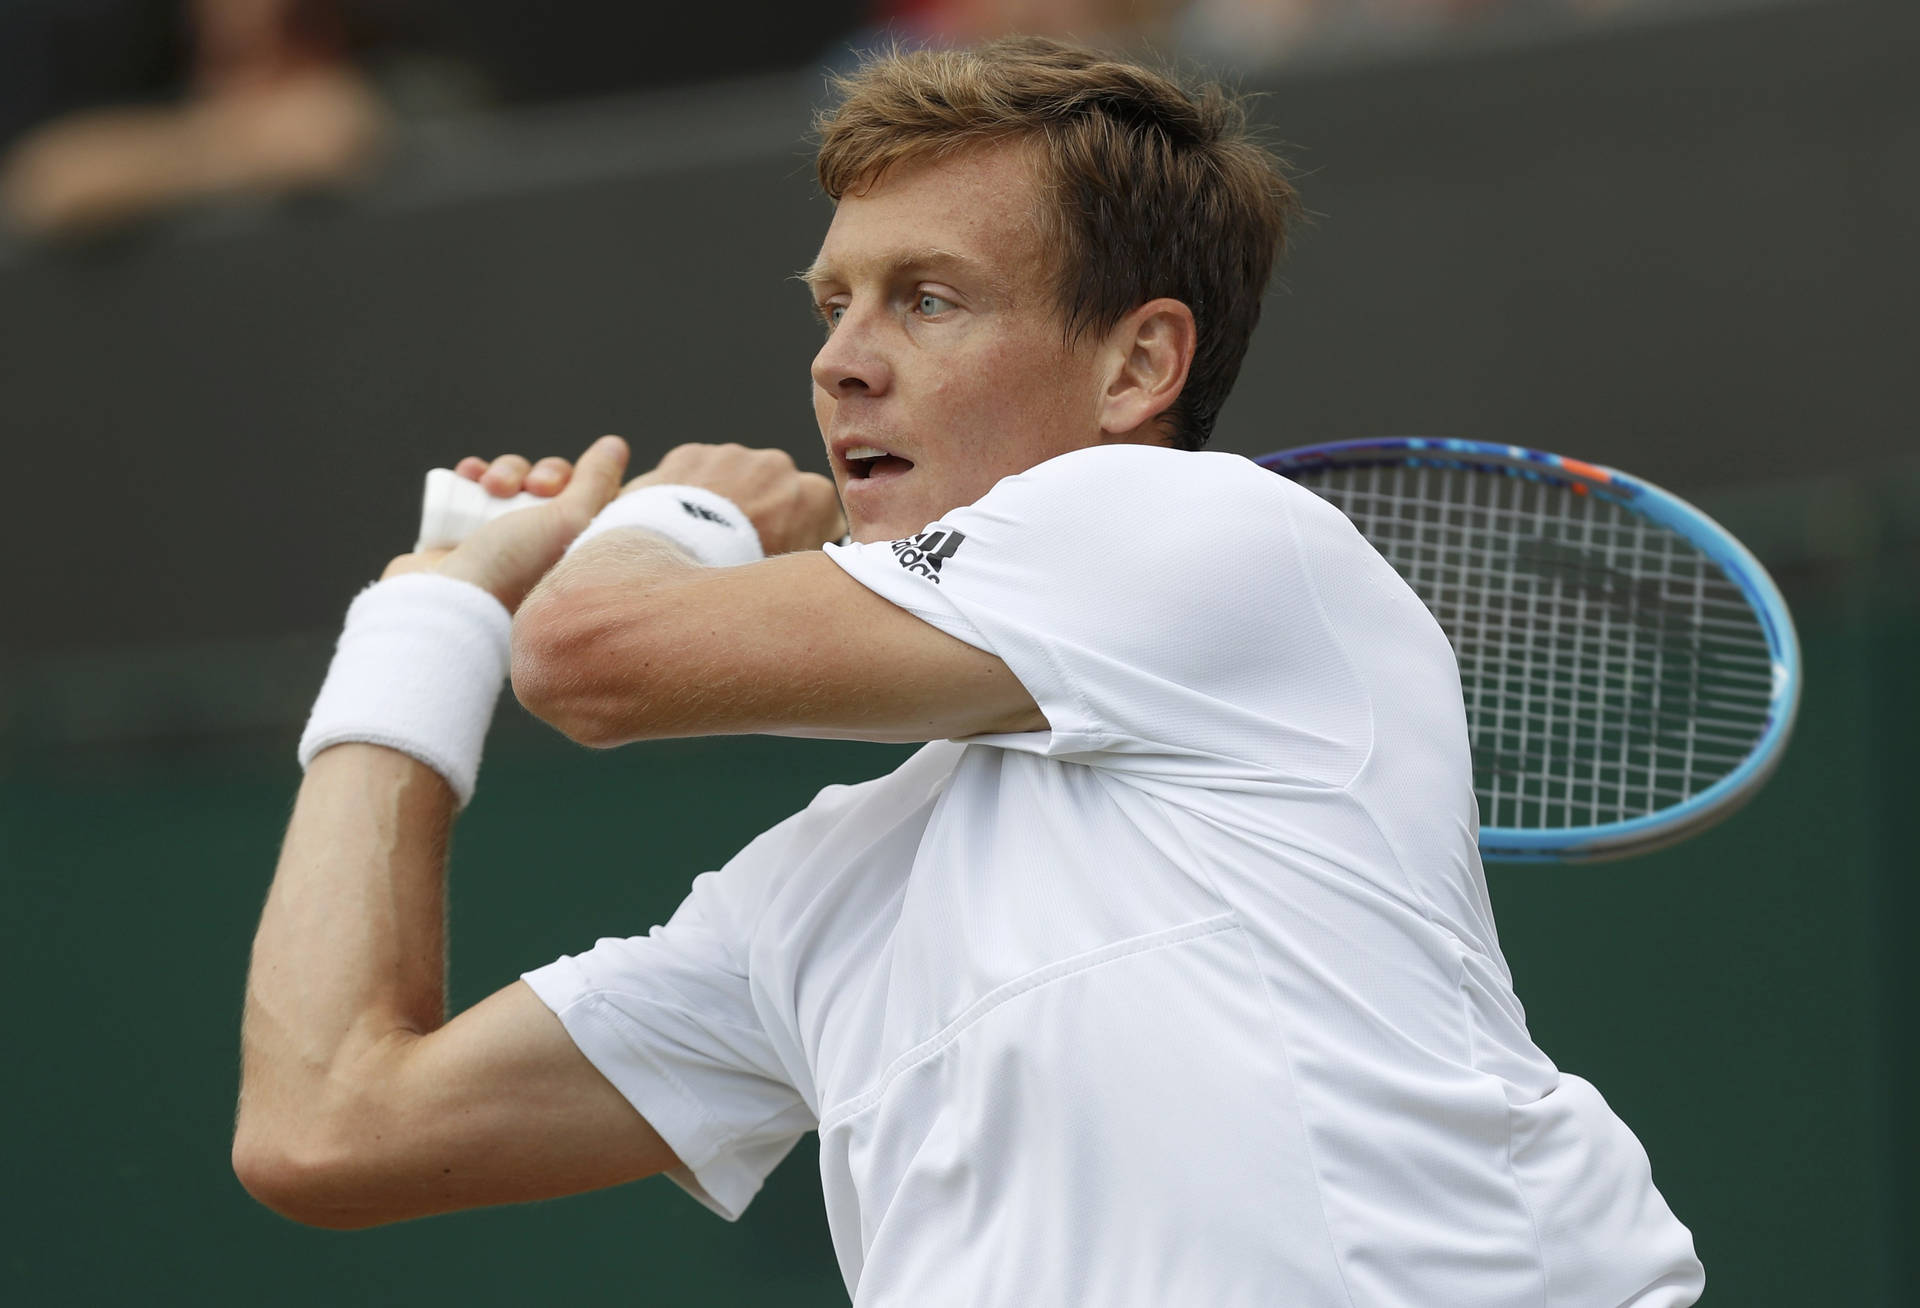 Tennis Pro Tomas Berdych in Action Wallpaper